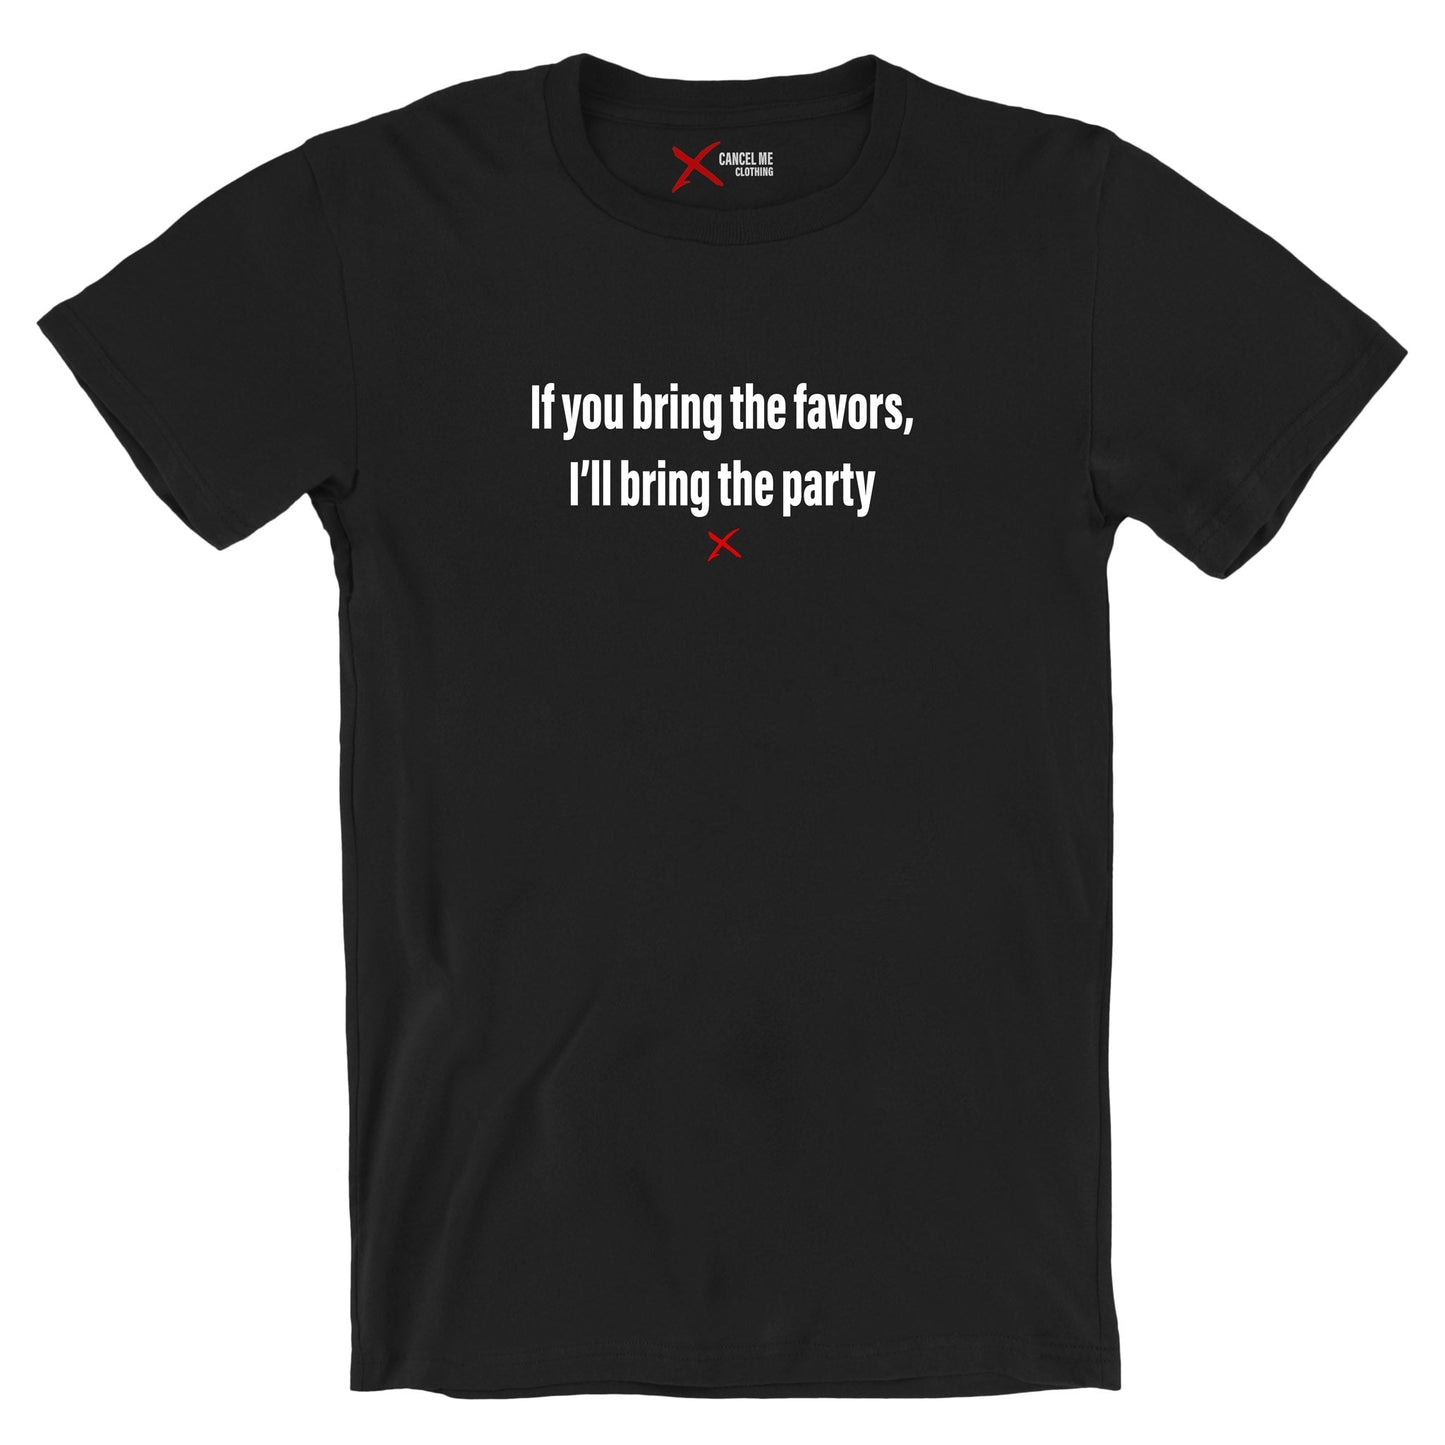 If you bring the favors, I'll bring the party - Shirt